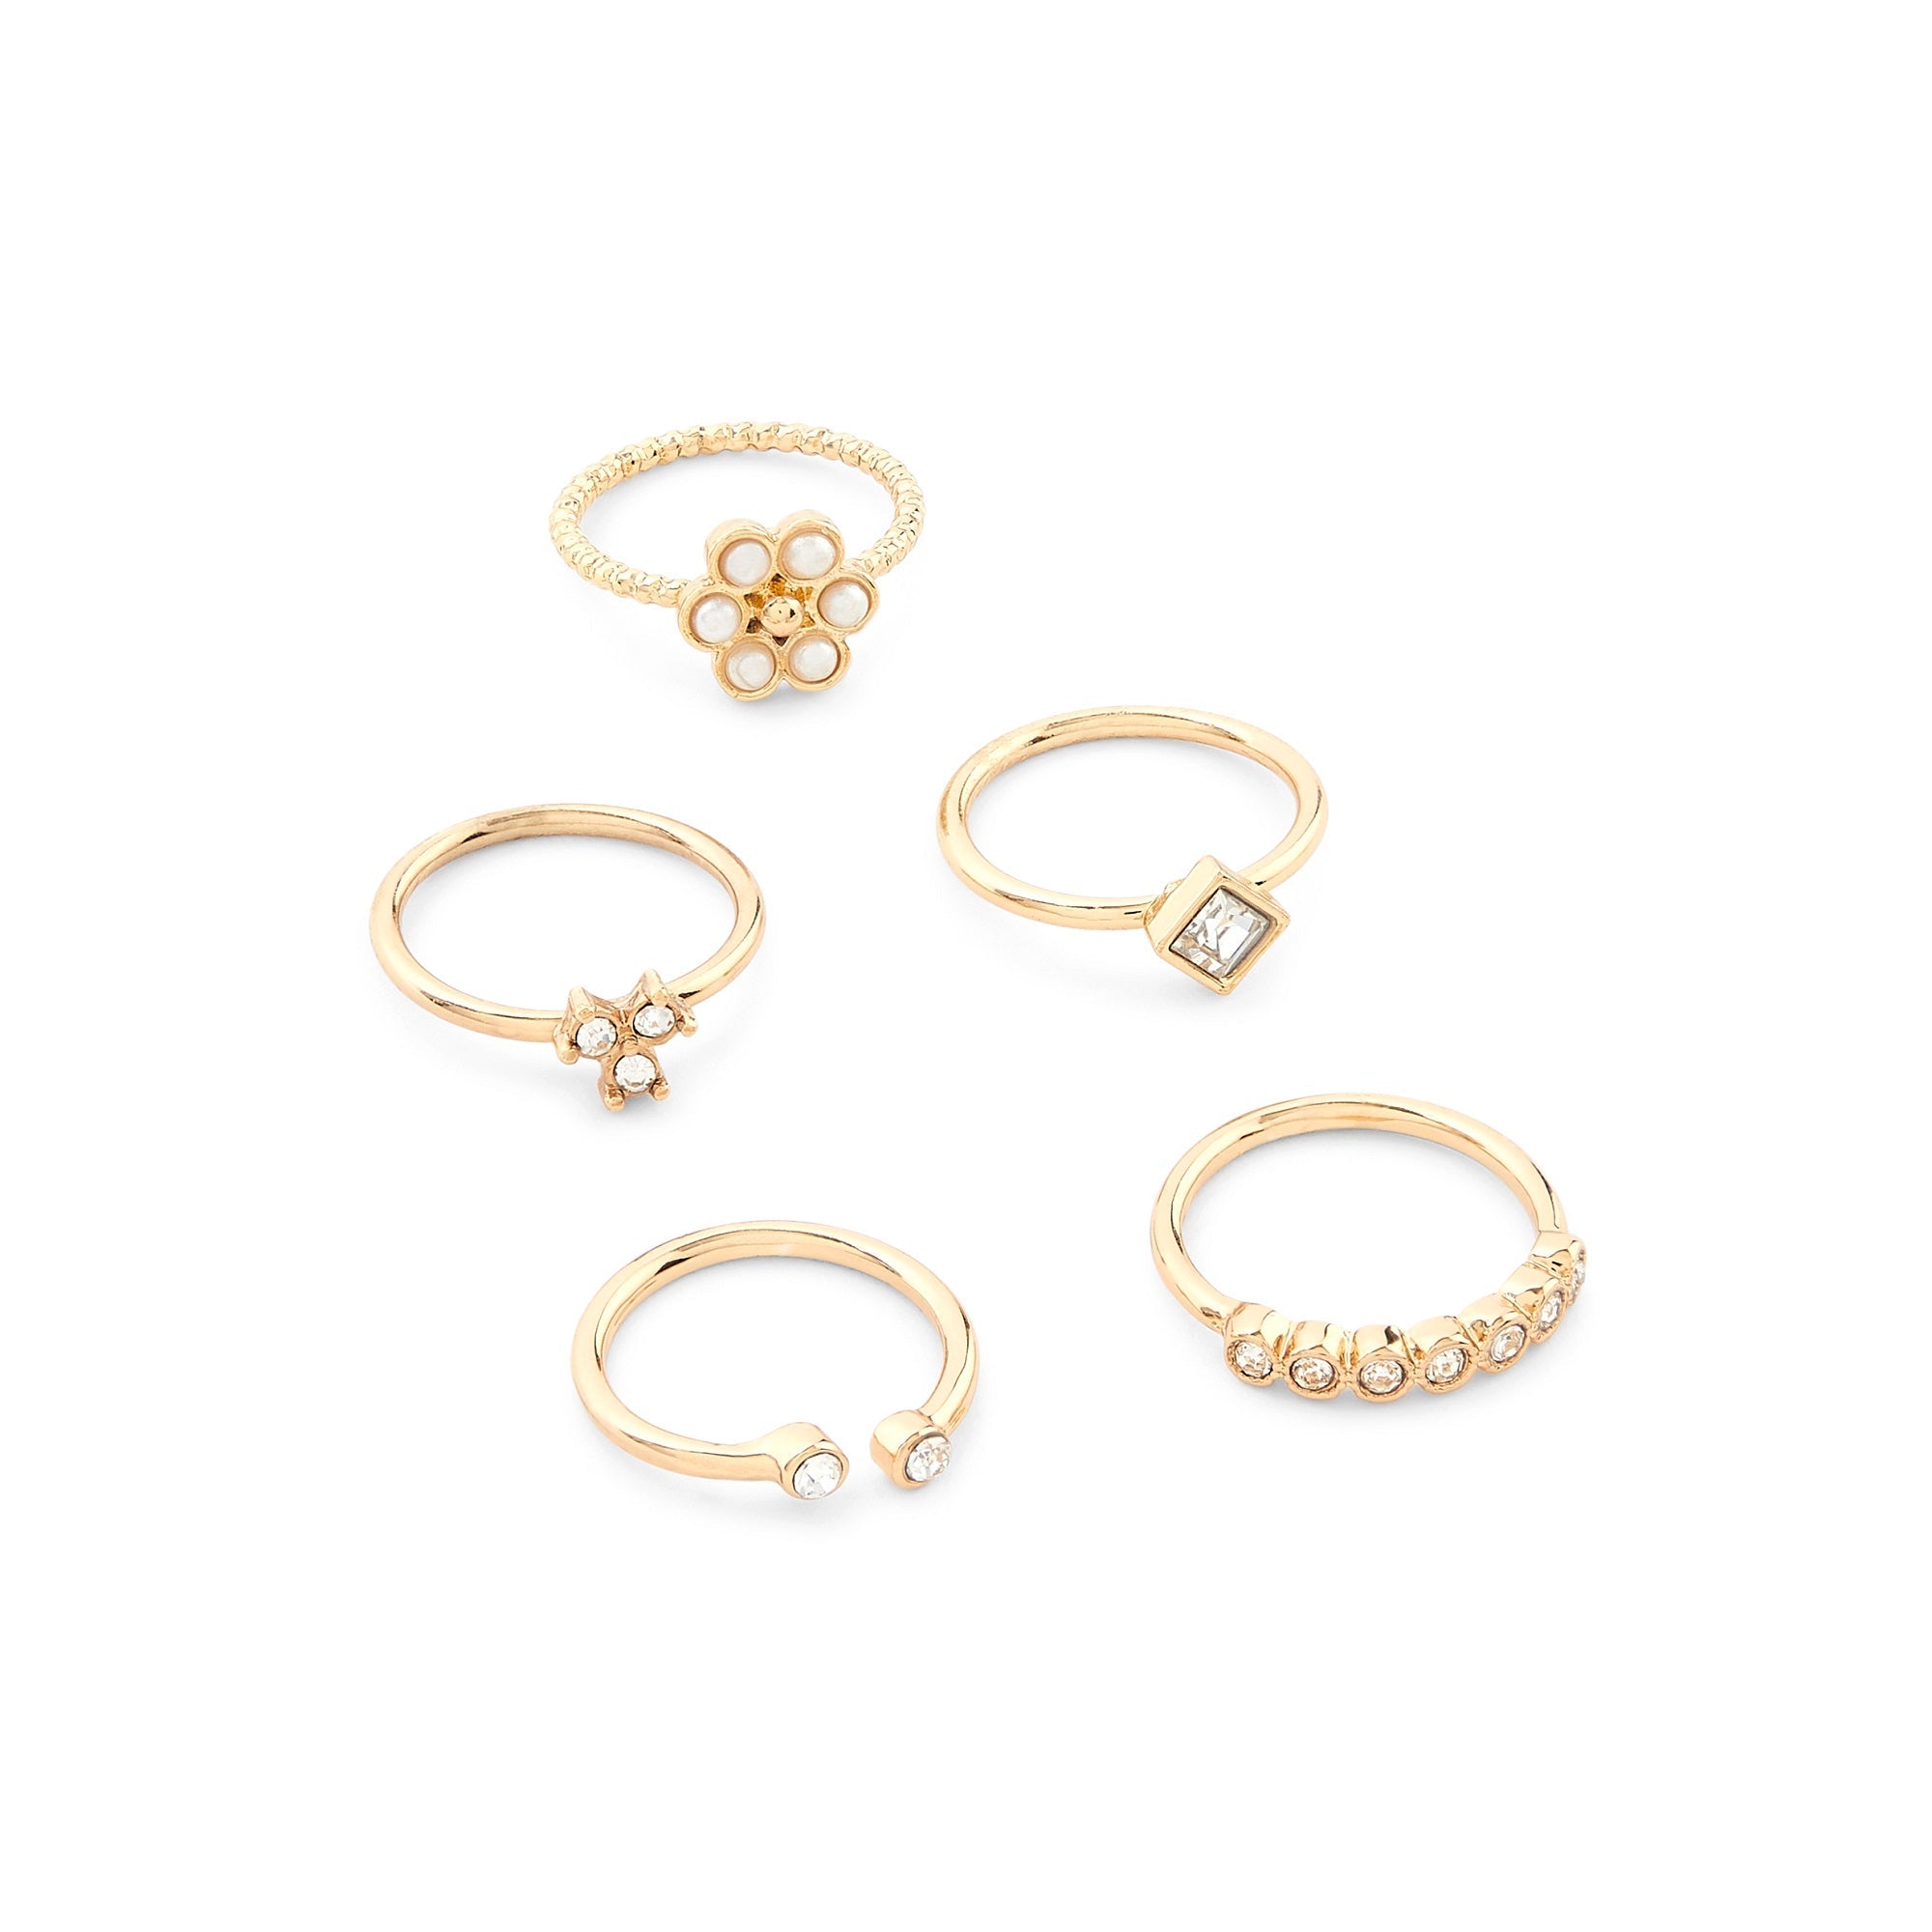 Accessorize London Women's Gold Set of 5 Pearl Flower Stacking Ring Pack -Medium